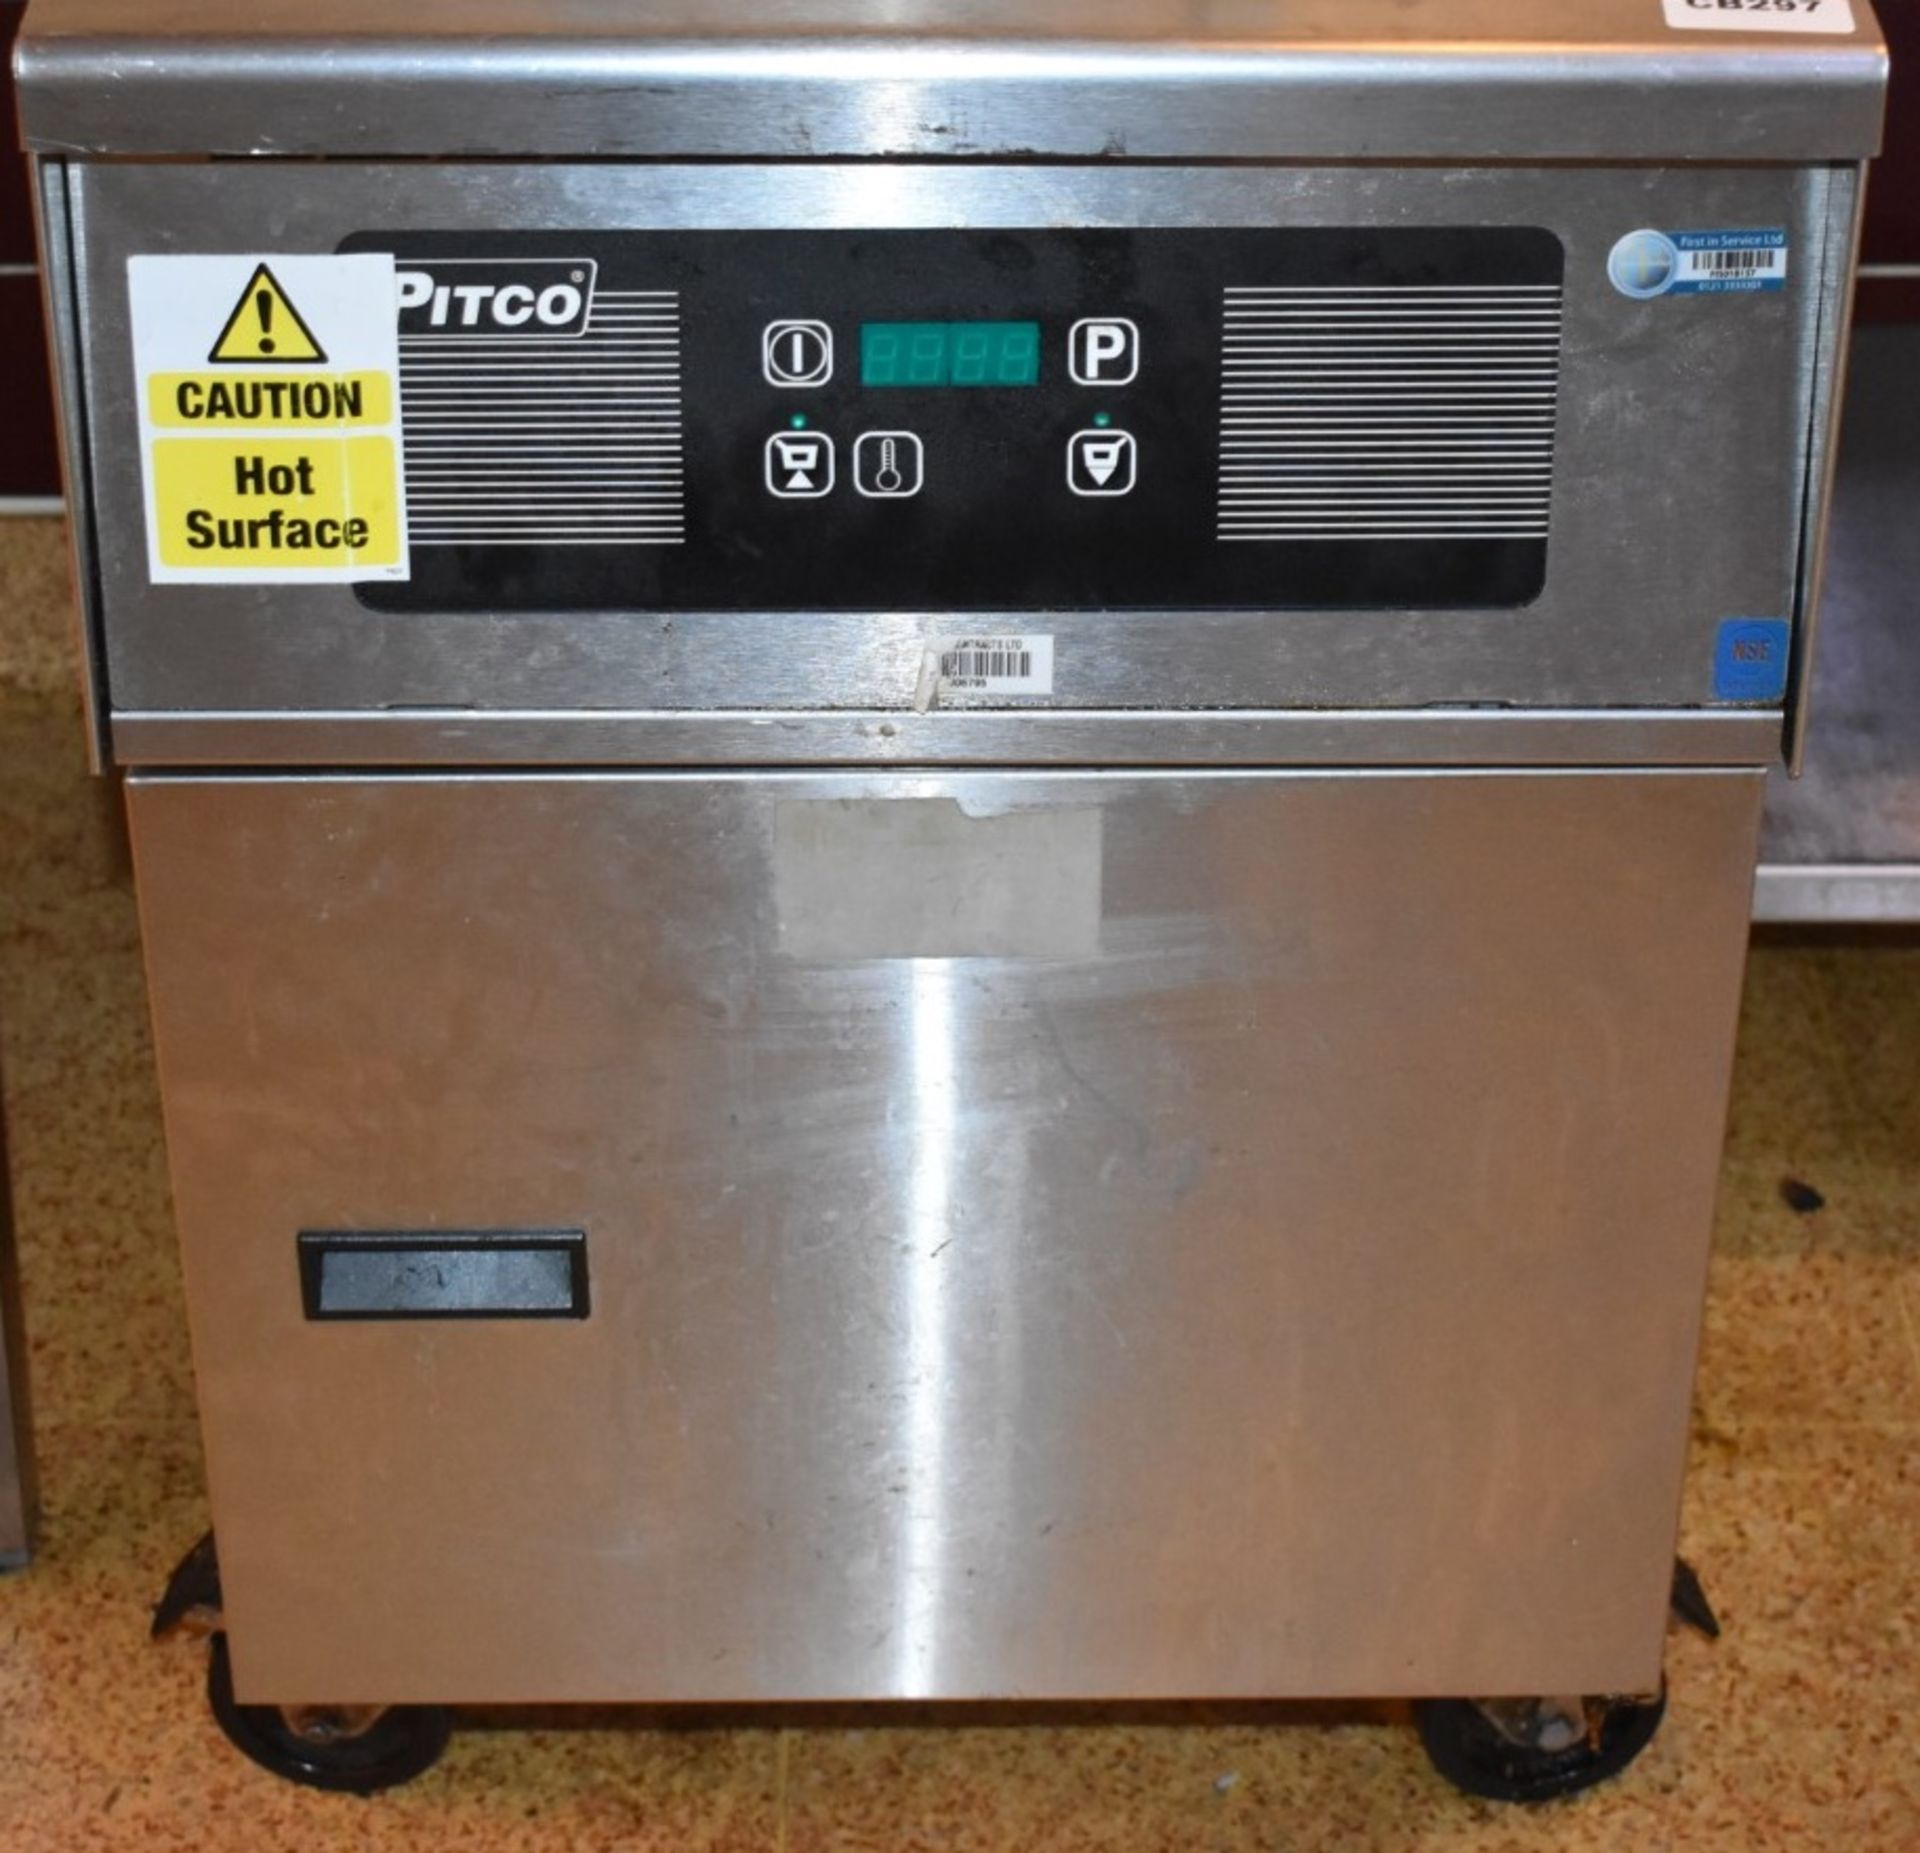 1 x Pifco Frialator Single Basket Gas Fryer With Basket Lifts - Stainless Steel Exterior - Model - Image 8 of 8